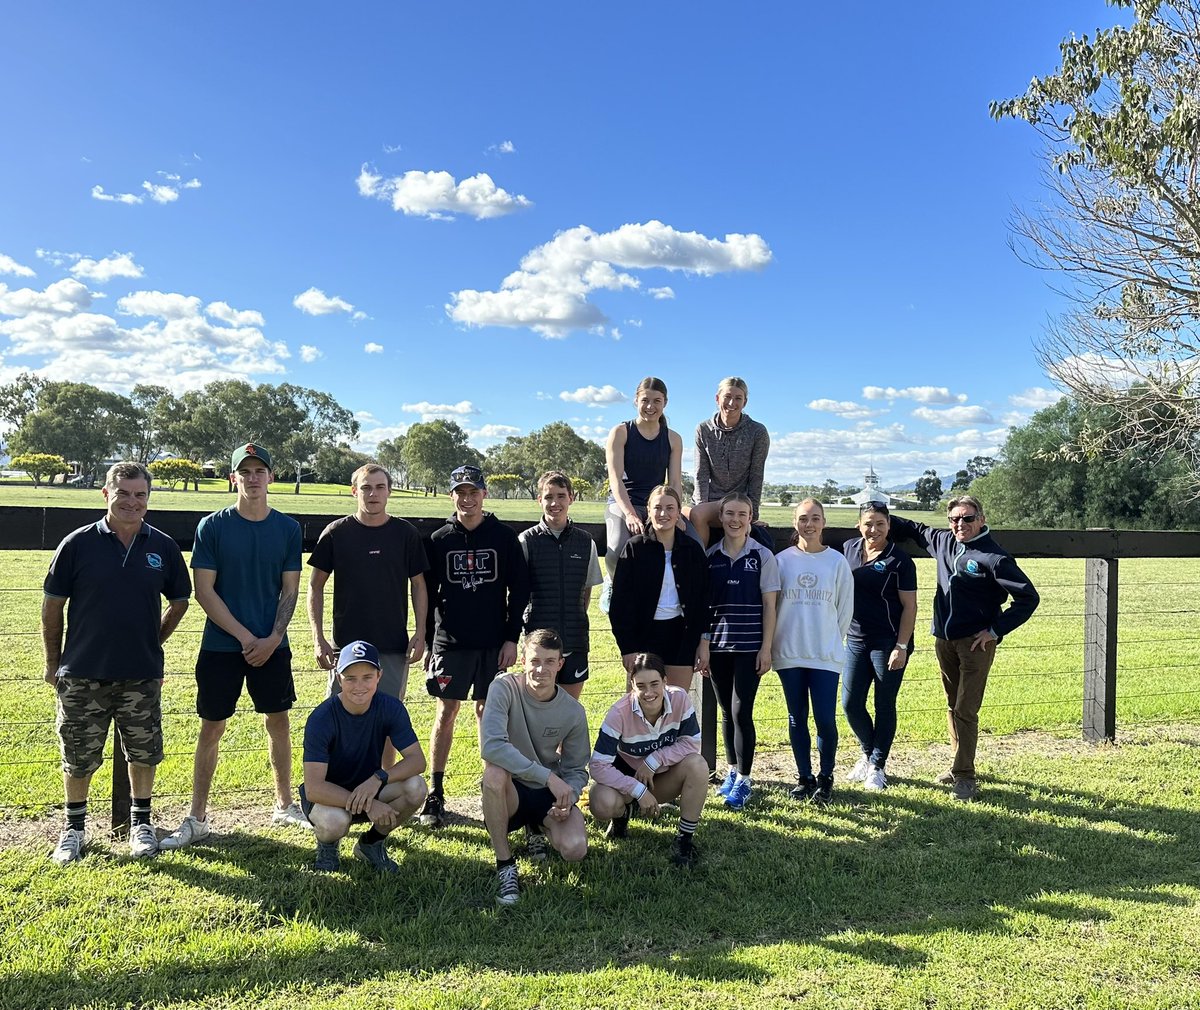 Our 3rd year apprentice jockeys are well into their race riding careers, however there’s always more to learn with your peers. Thanks to the team and all of our guest presenters and coaches assisting with apprentice school at the Scone Thoroughbred College.